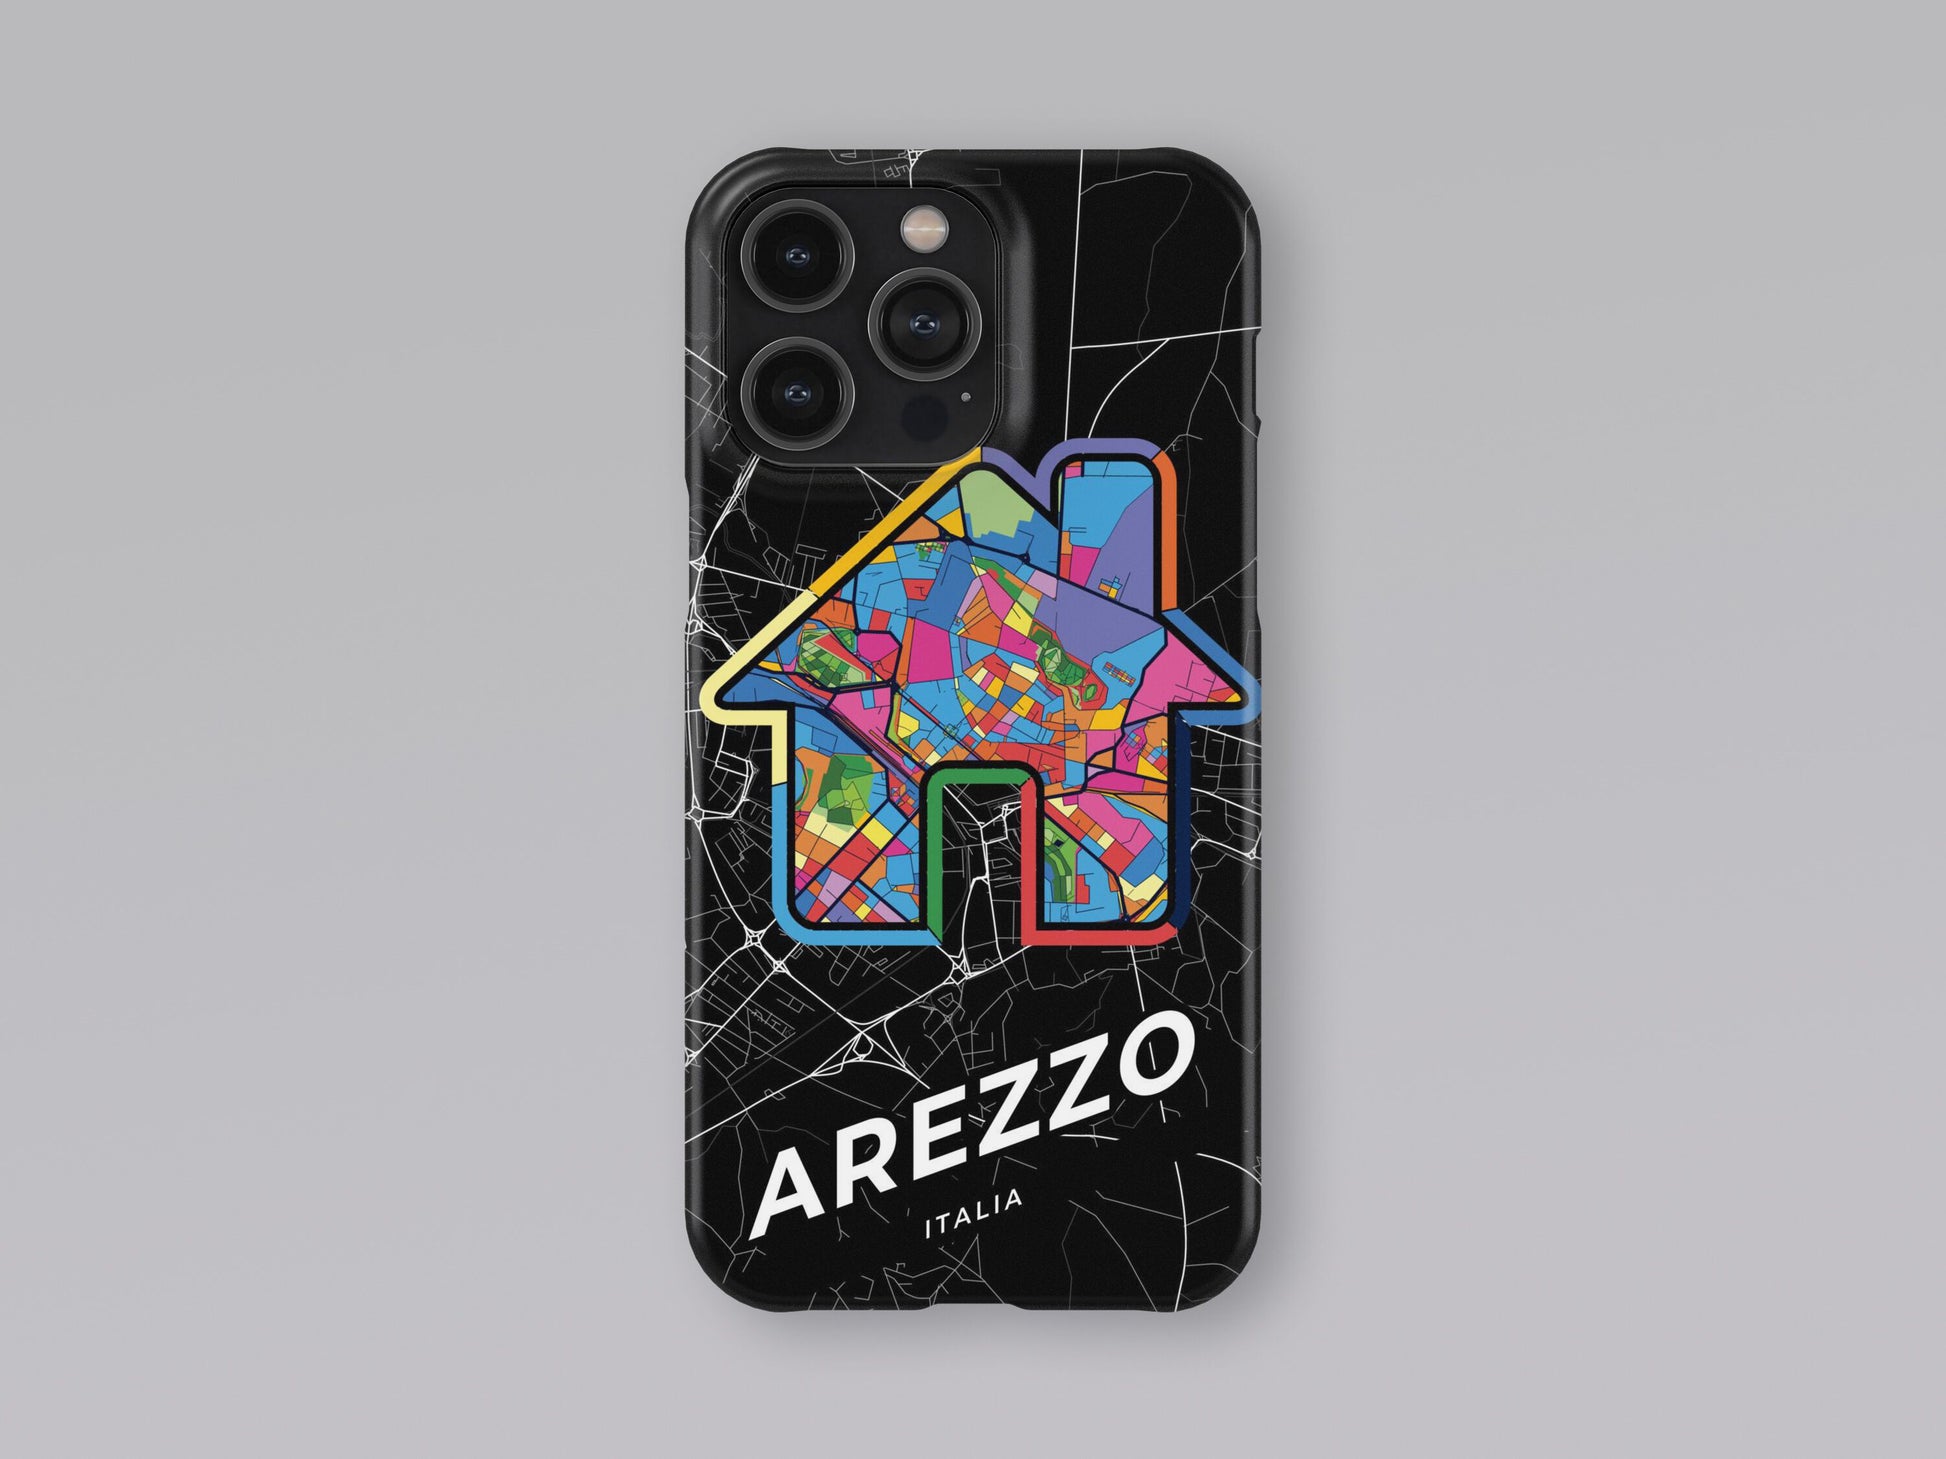 Arezzo Italy slim phone case with colorful icon. Birthday, wedding or housewarming gift. Couple match cases. 3